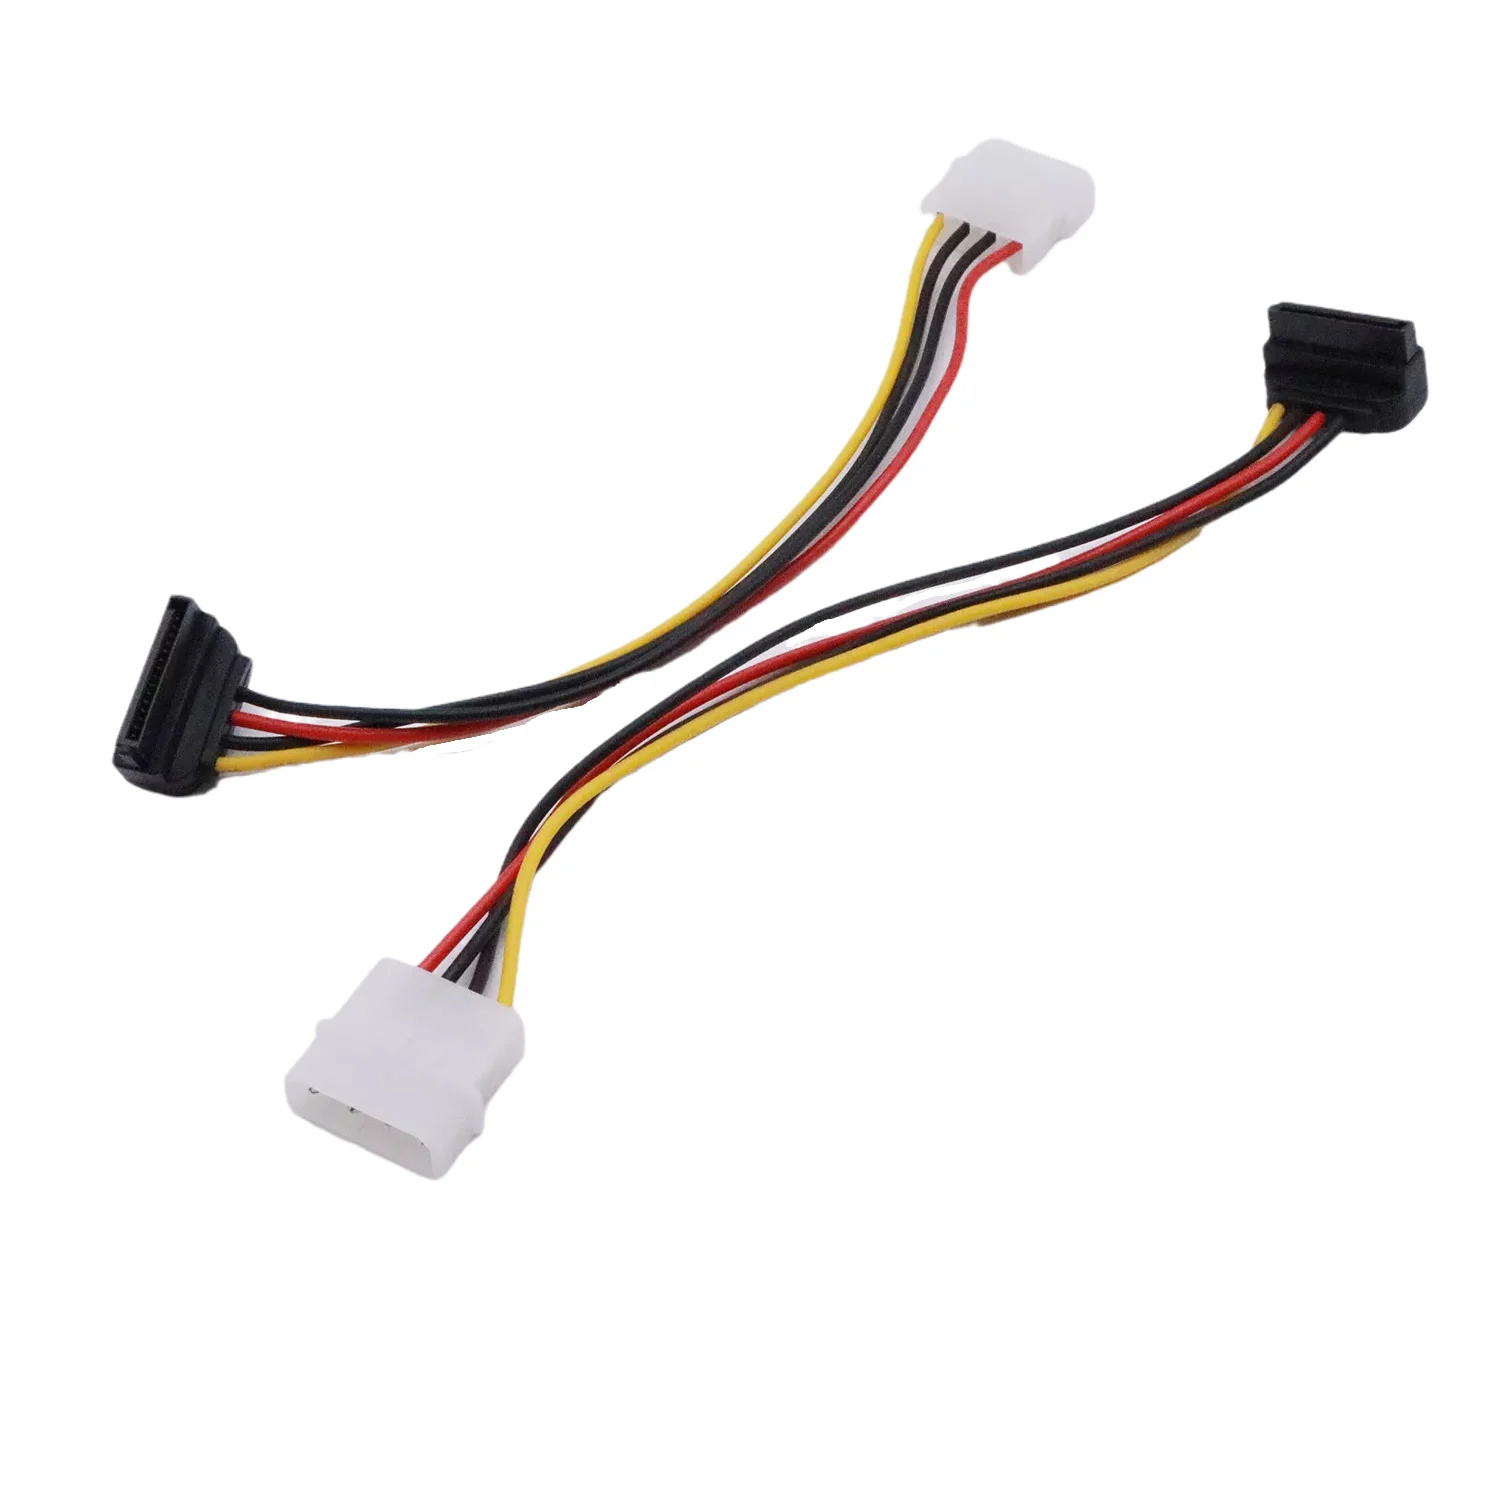 LOT OF 25 IDE/Molex 4-Pin Male To Serial SATA 15-Pin Female Power Adapter Cable 